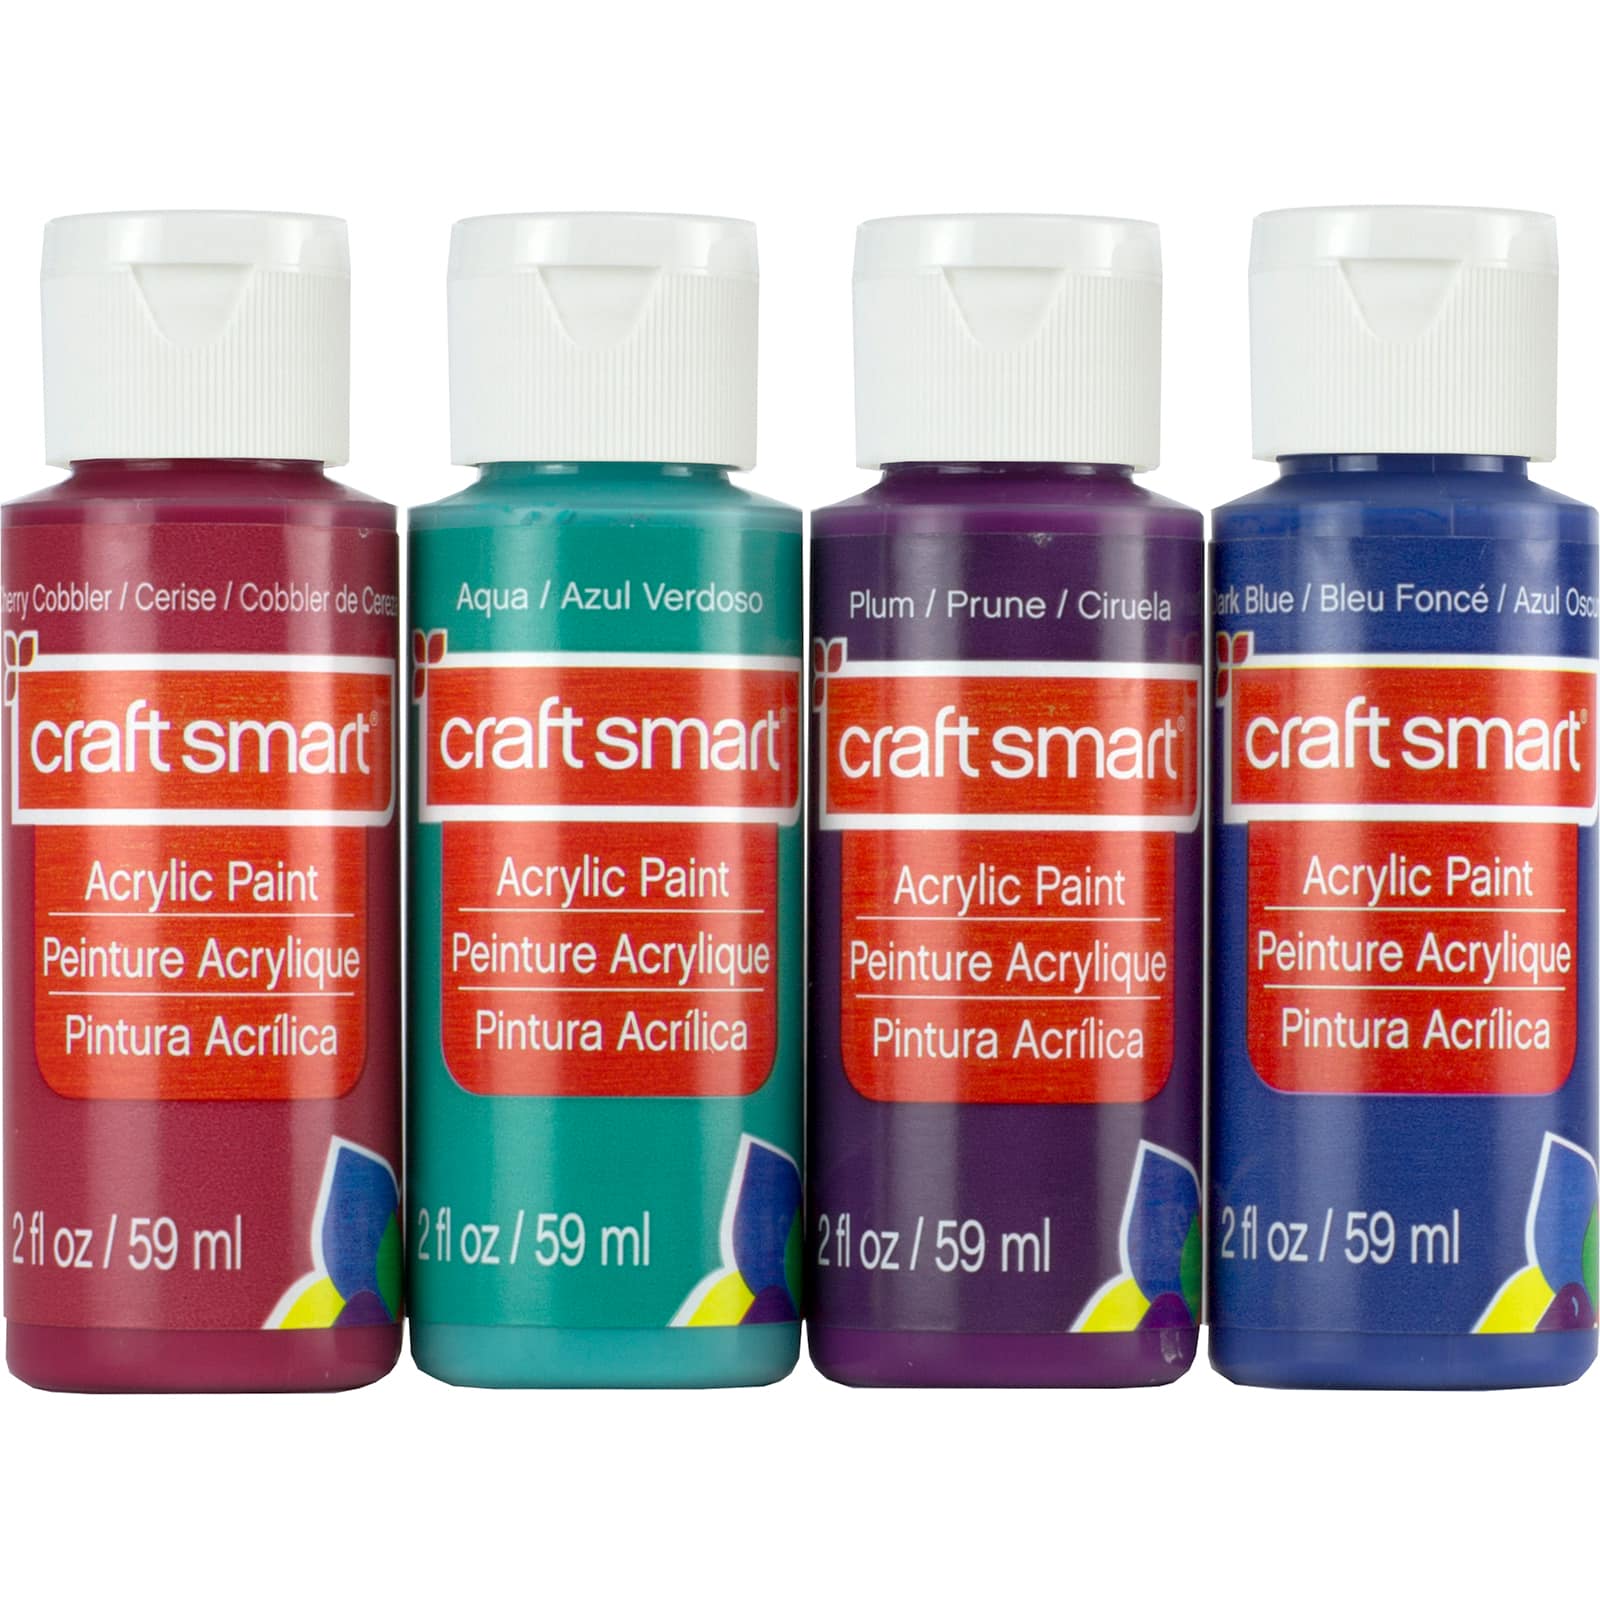 12 Packs: 4 ct. (48 total) Pastel Acrylic Paint Value Set by Craft